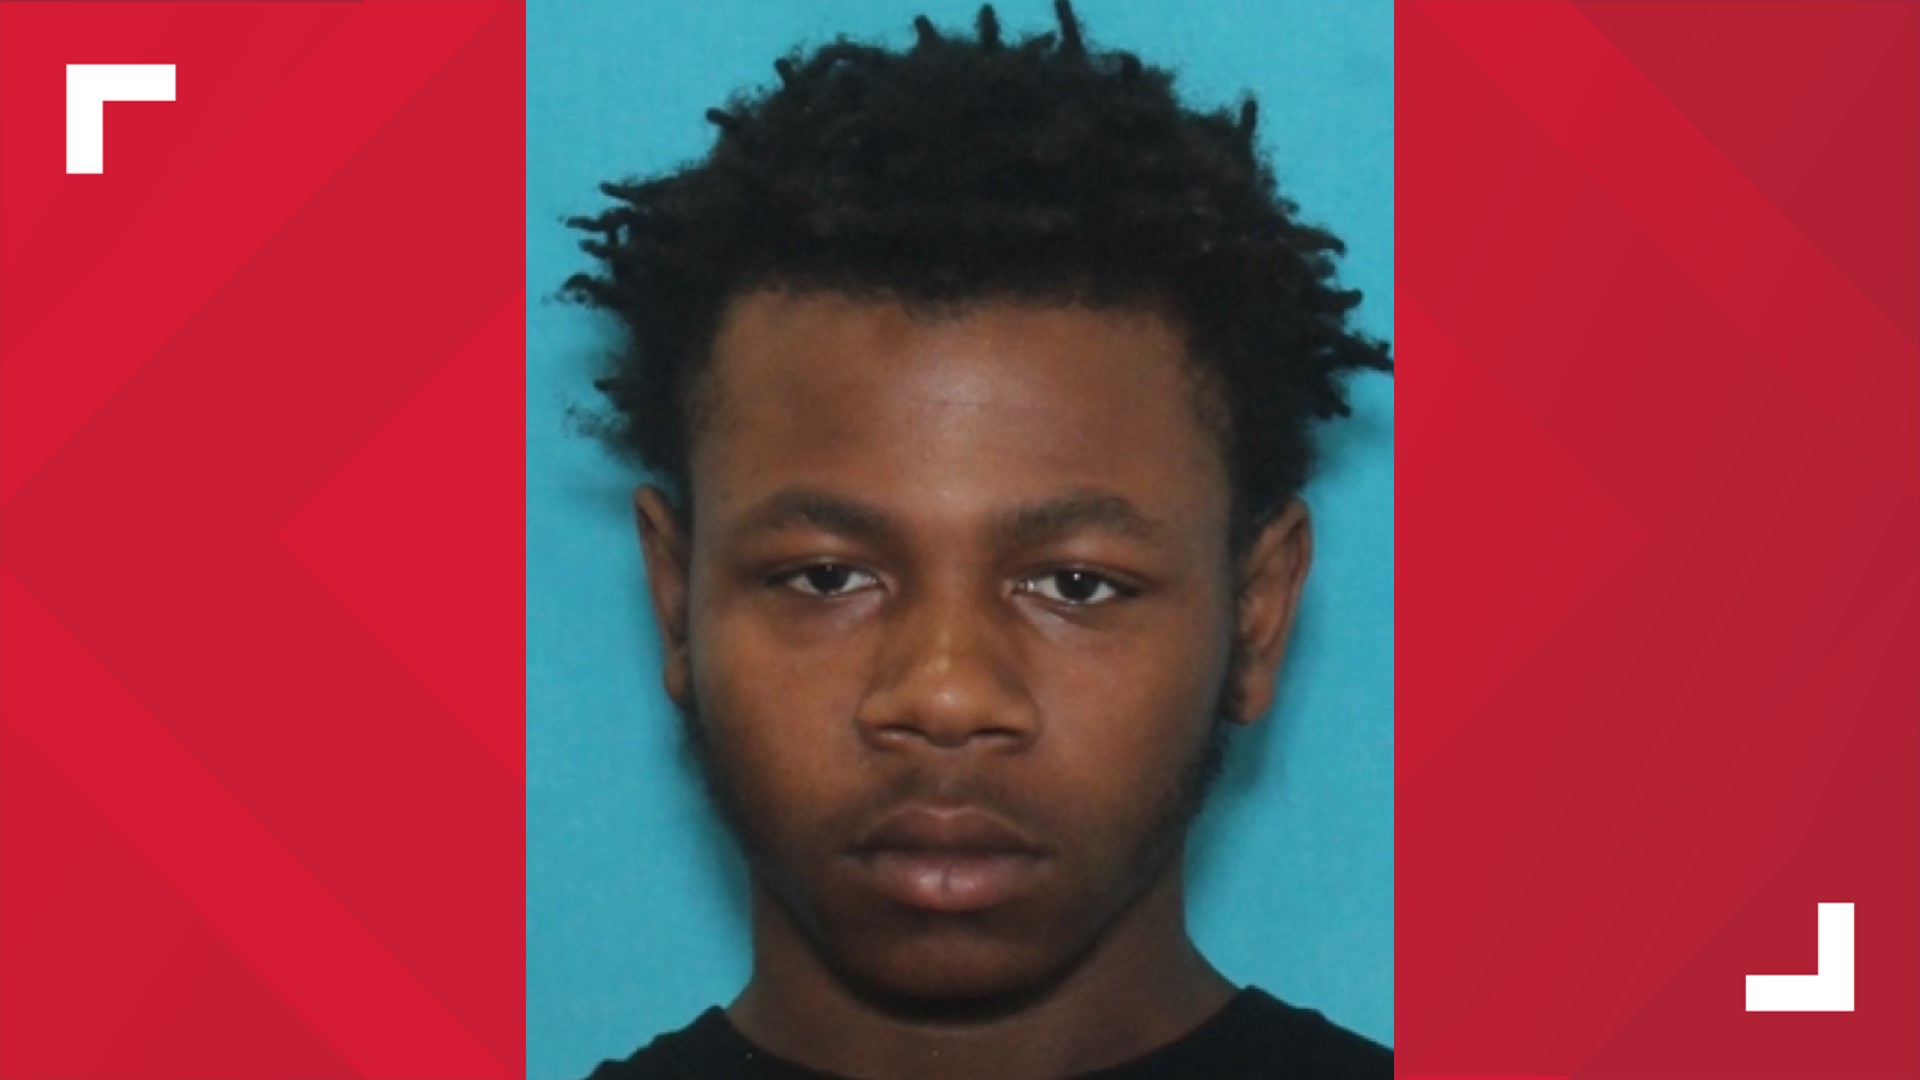 York City Police have charged Ty'quan Rosario, 16, with the stabbing death of Michael Keys III.